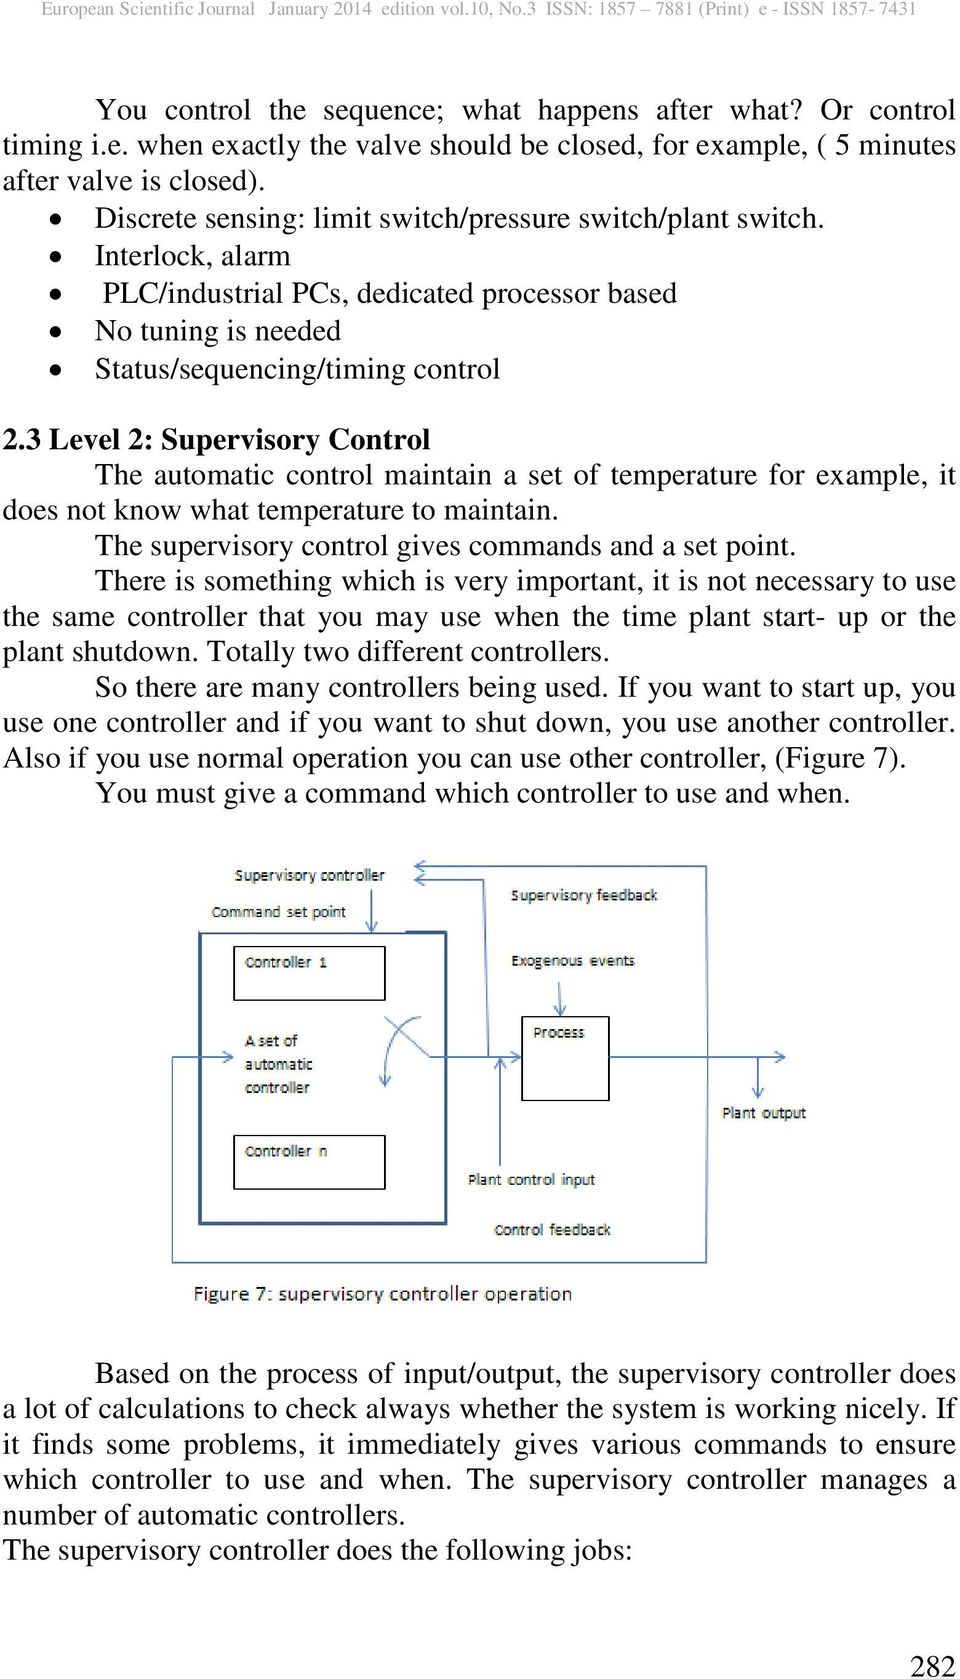 3 Level 2: Supervisory Control The automatic control maintain a set of temperature for example, it does not know what temperature to maintain. The supervisory control gives commands and a set point.